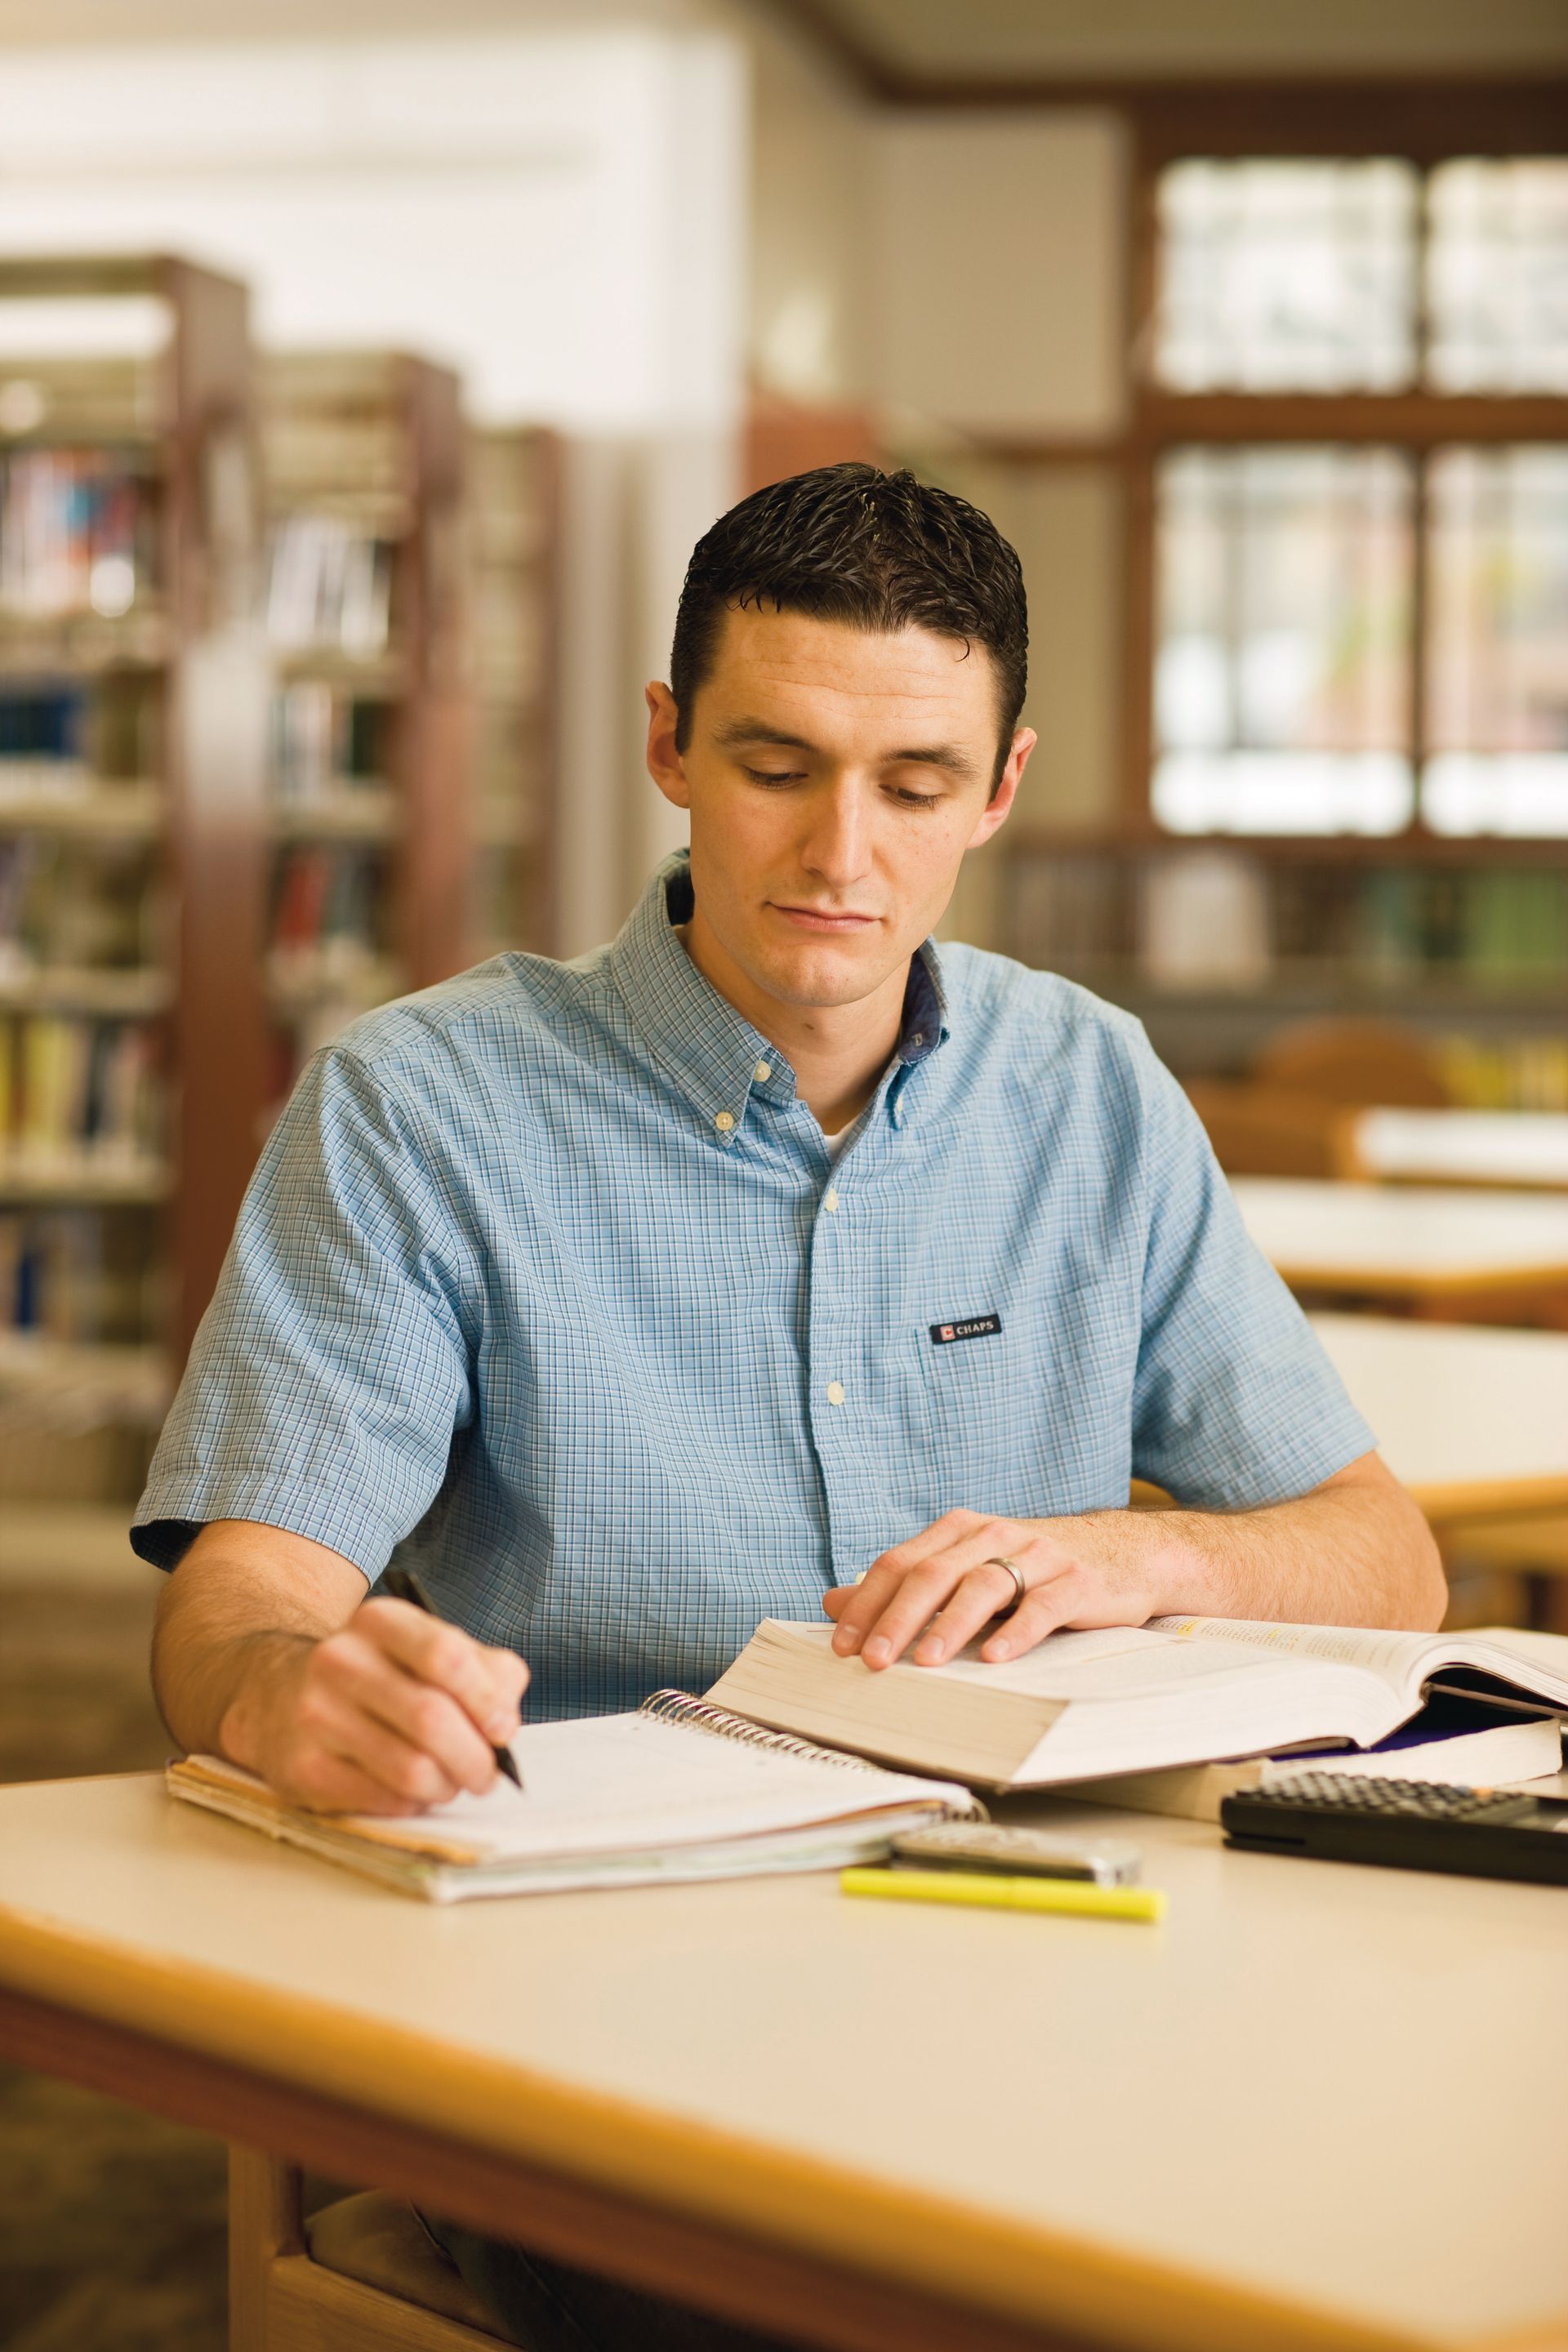 A young man studies and takes notes while in a library.